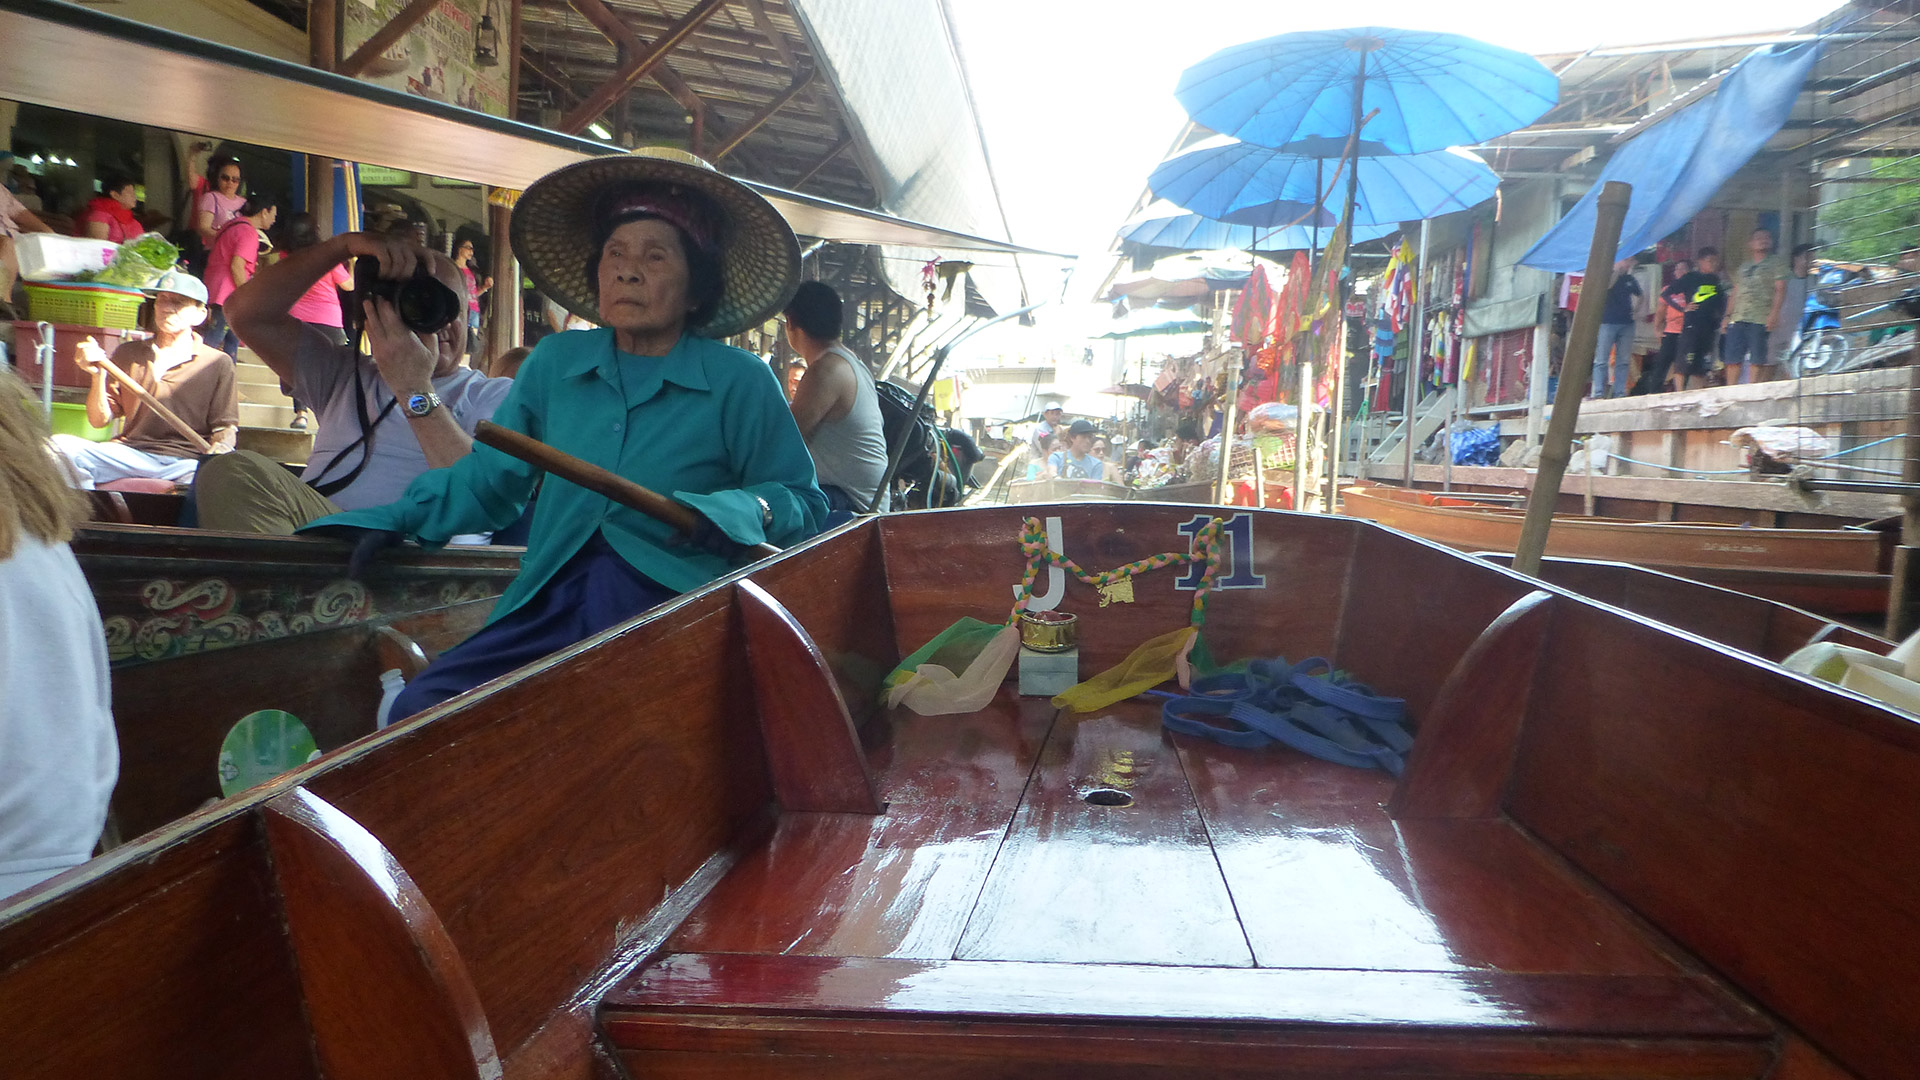 A boat in the floating market in Thailand. A woman in a straw hat paddles another boat nearby.